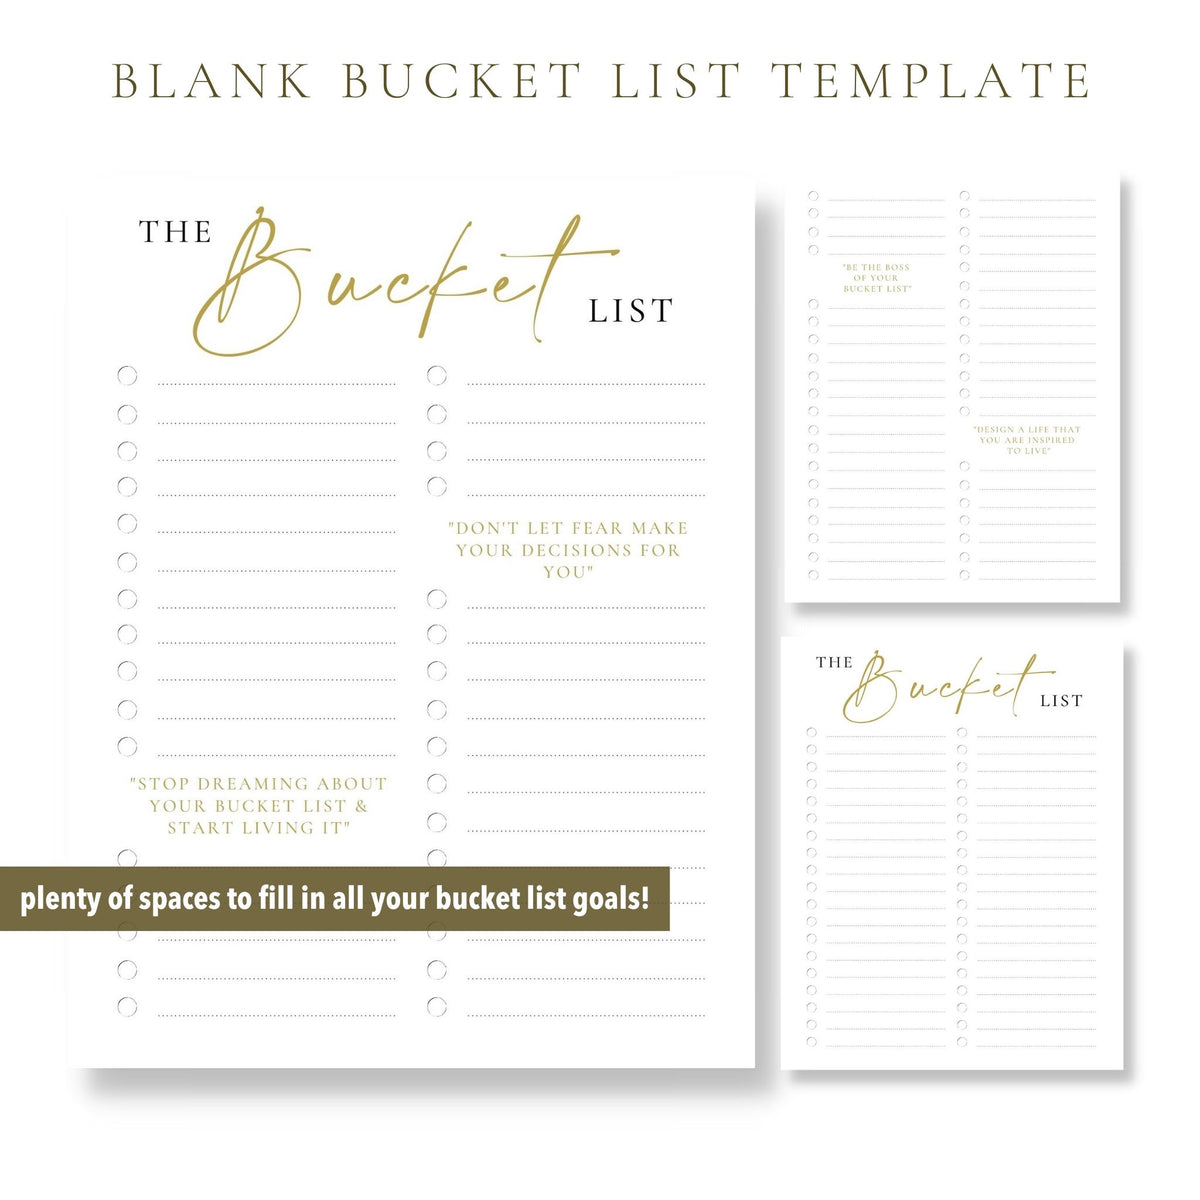 Printable At Home Bucket List (Blank Template Included!) – buck & co.